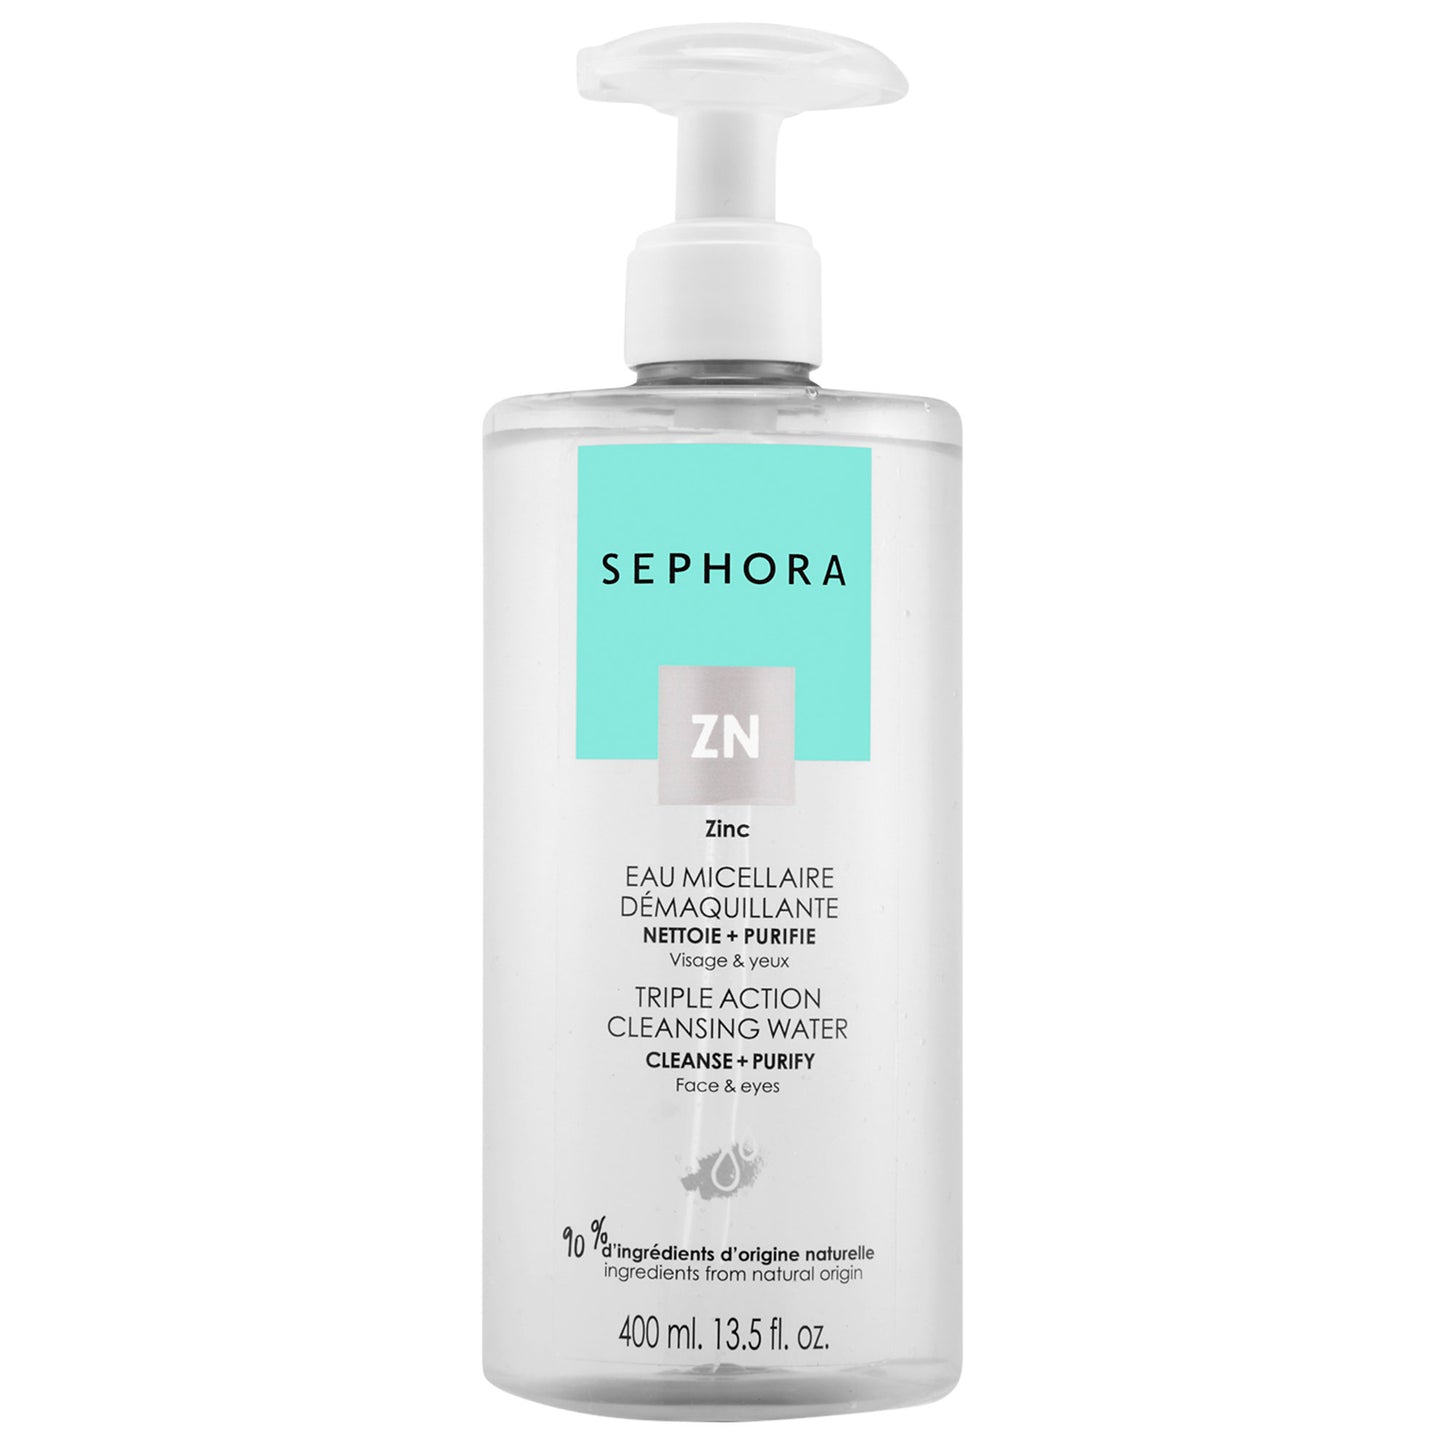 Sephora - Triple Action Cleansing Water - Cleanse + Purify